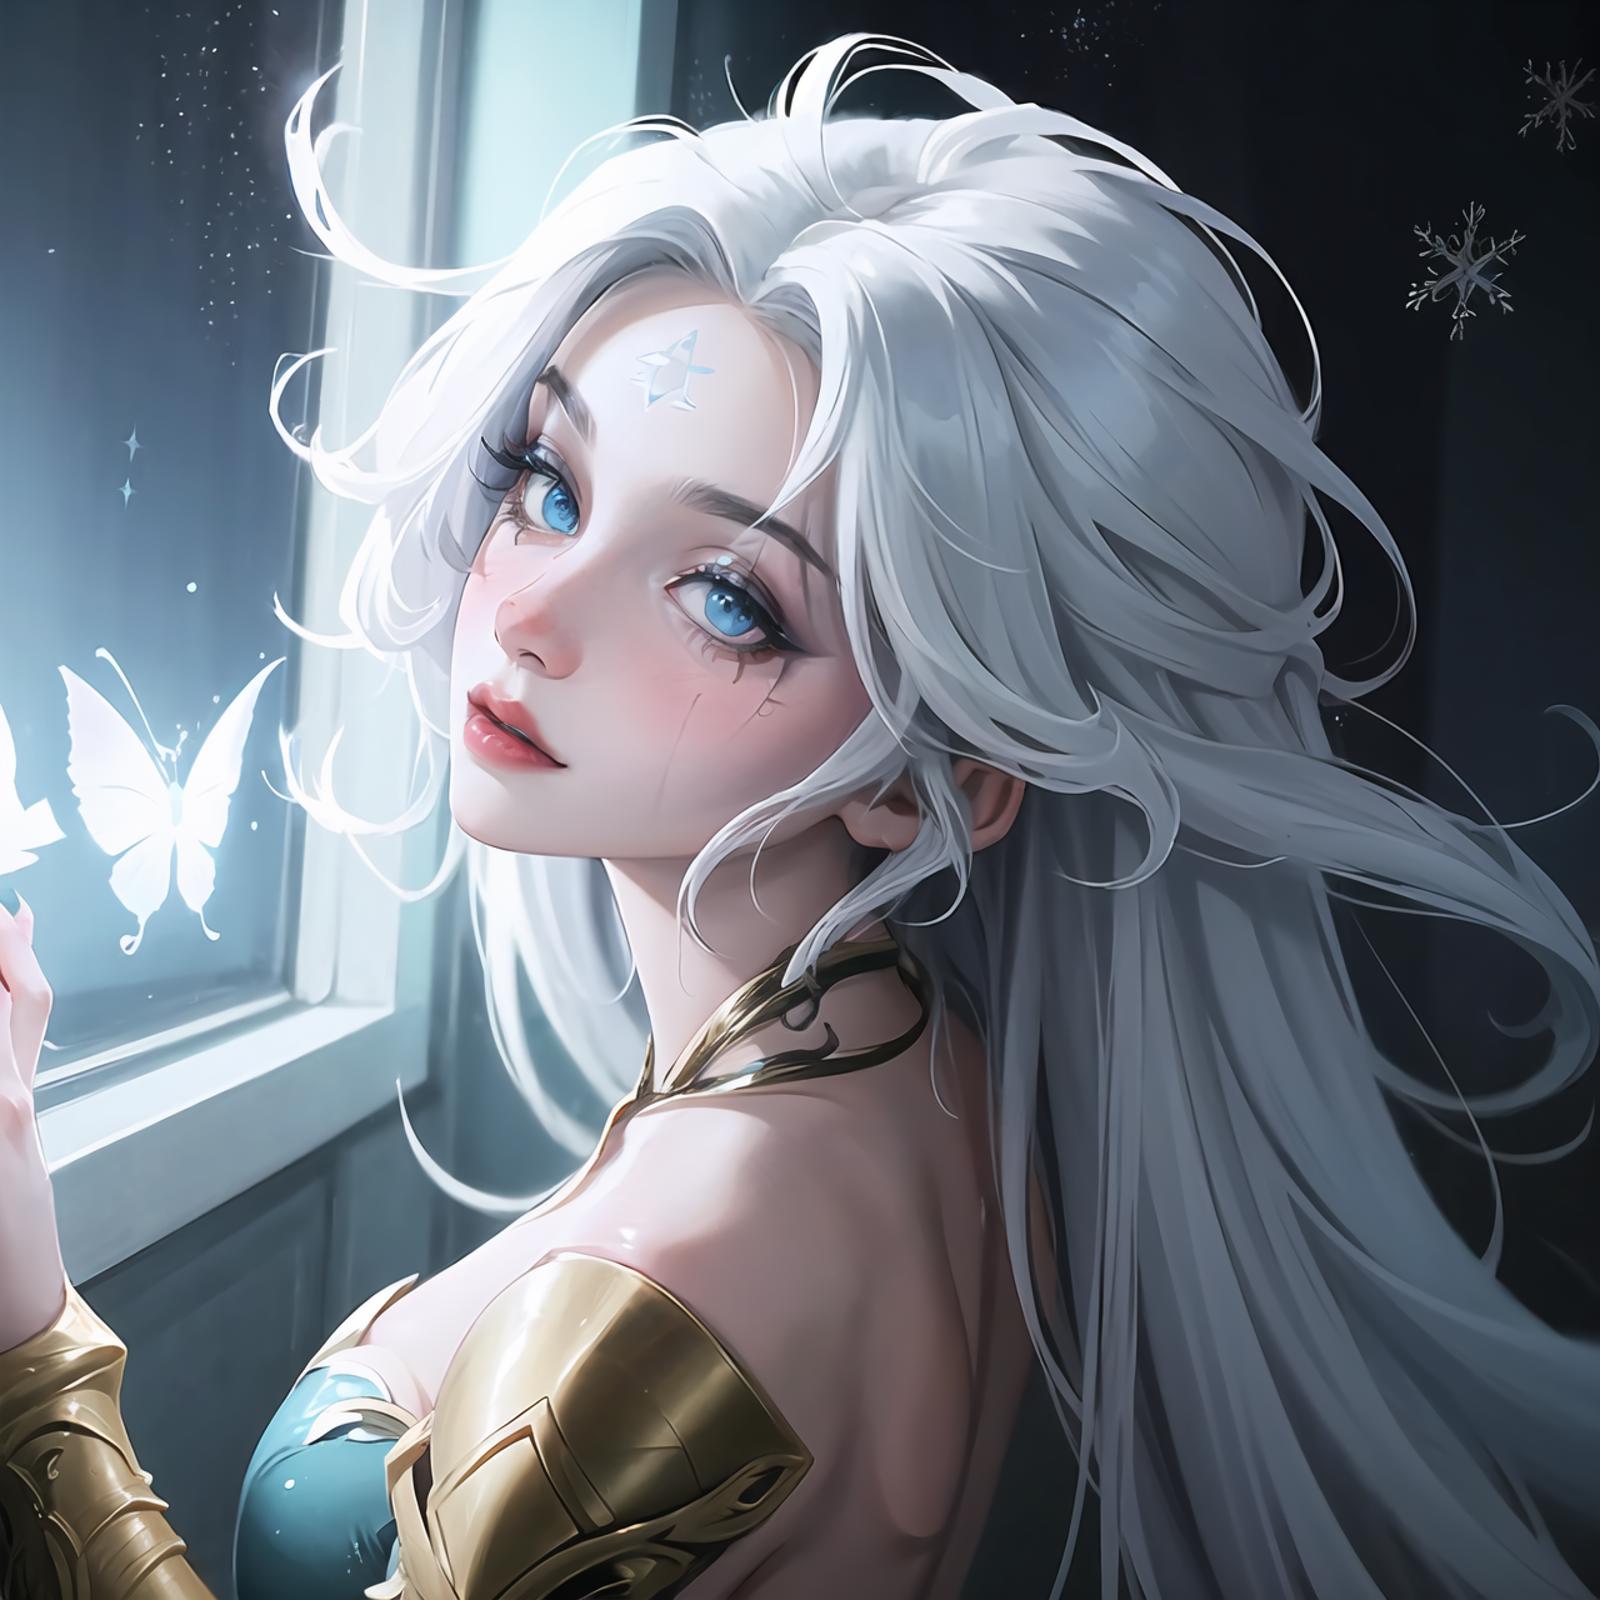 Winterblessed Diana | League of Legends image by appeal